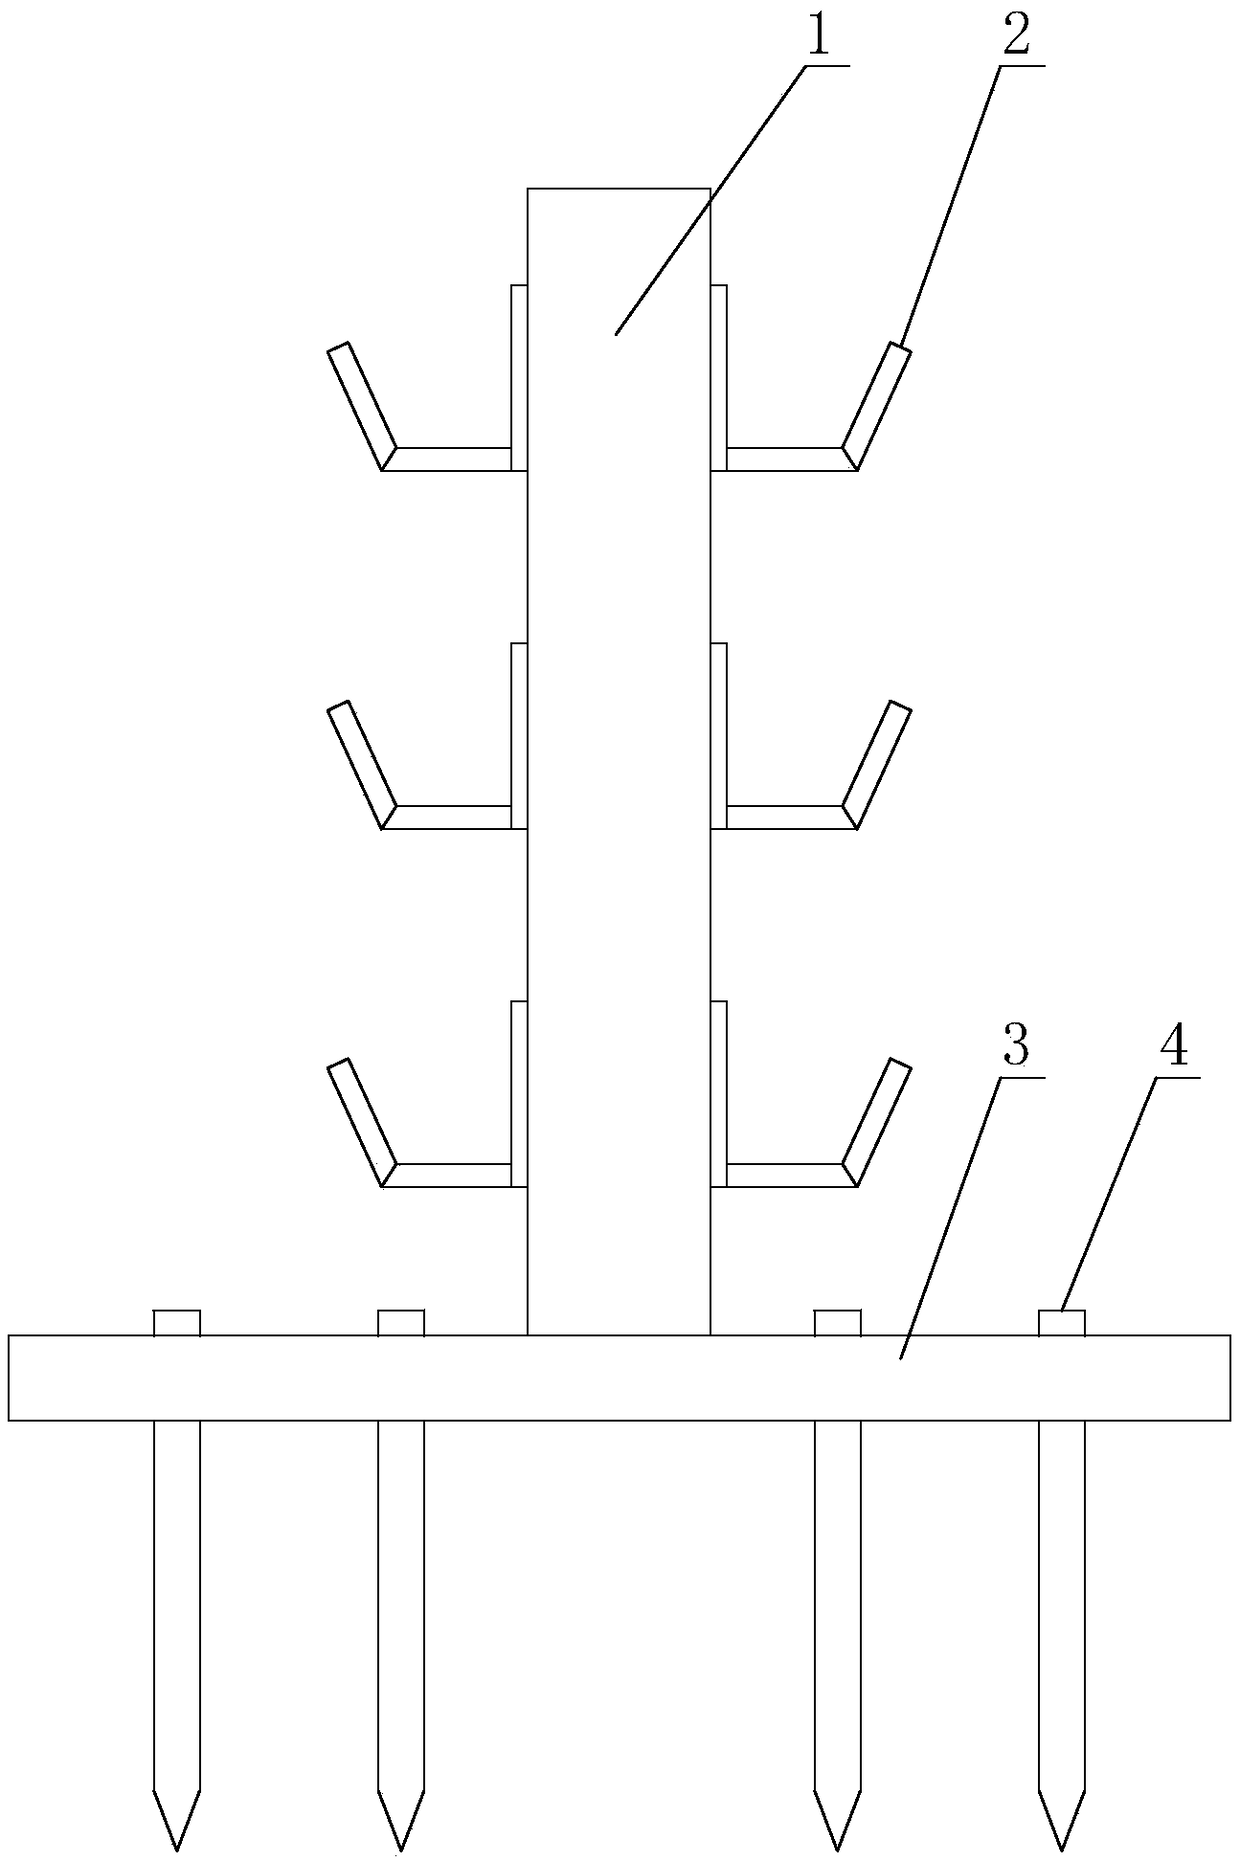 Supporting frame for petroleum pipeline